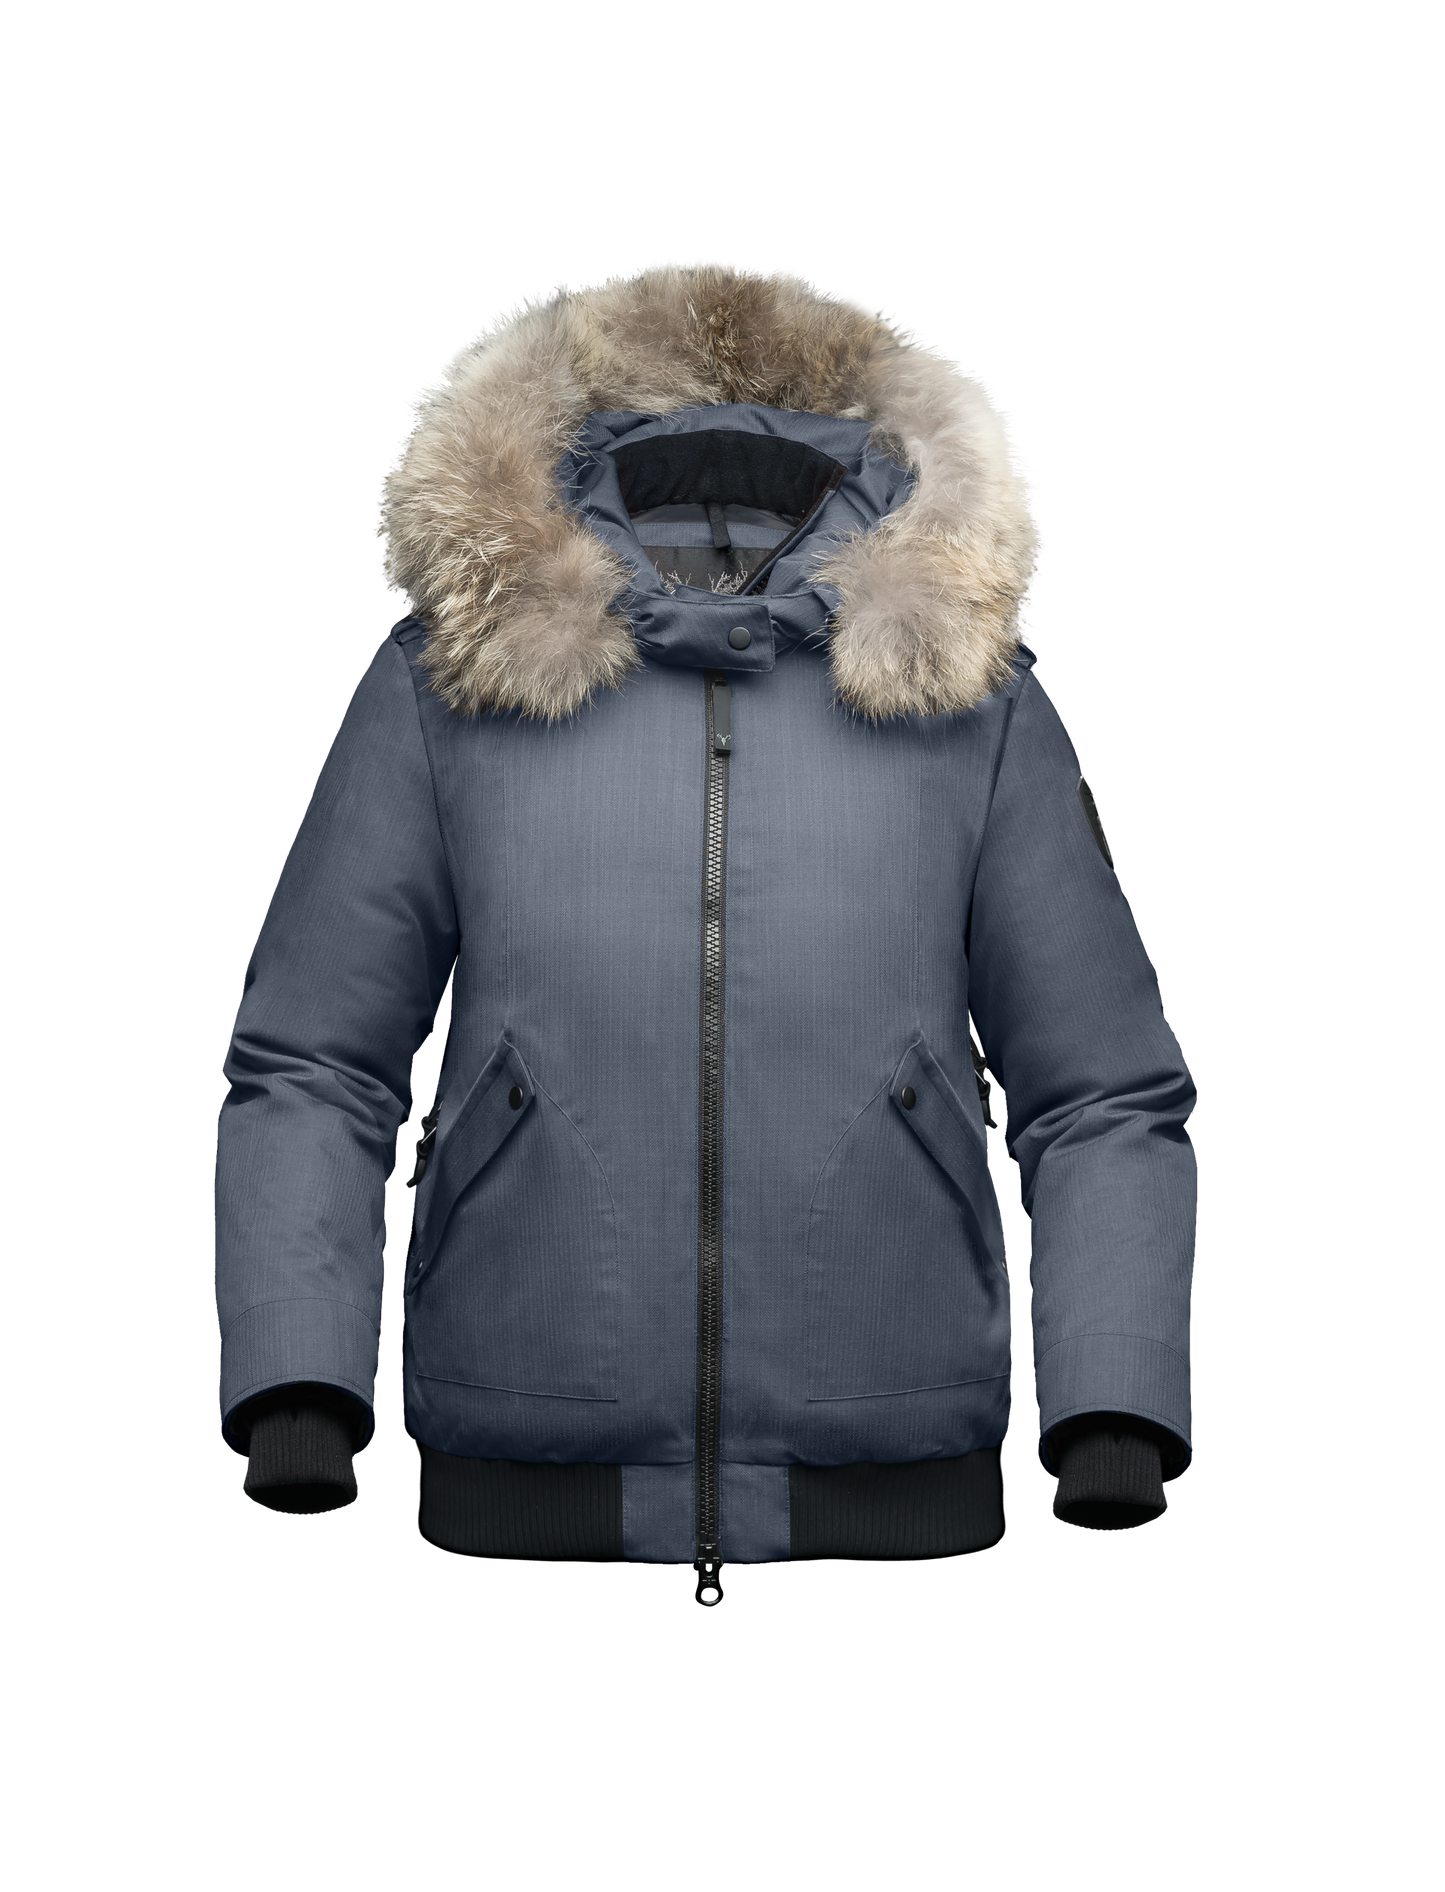 Women's bomber style down filled jacket with a removable hood and fur trim in CH Balsam